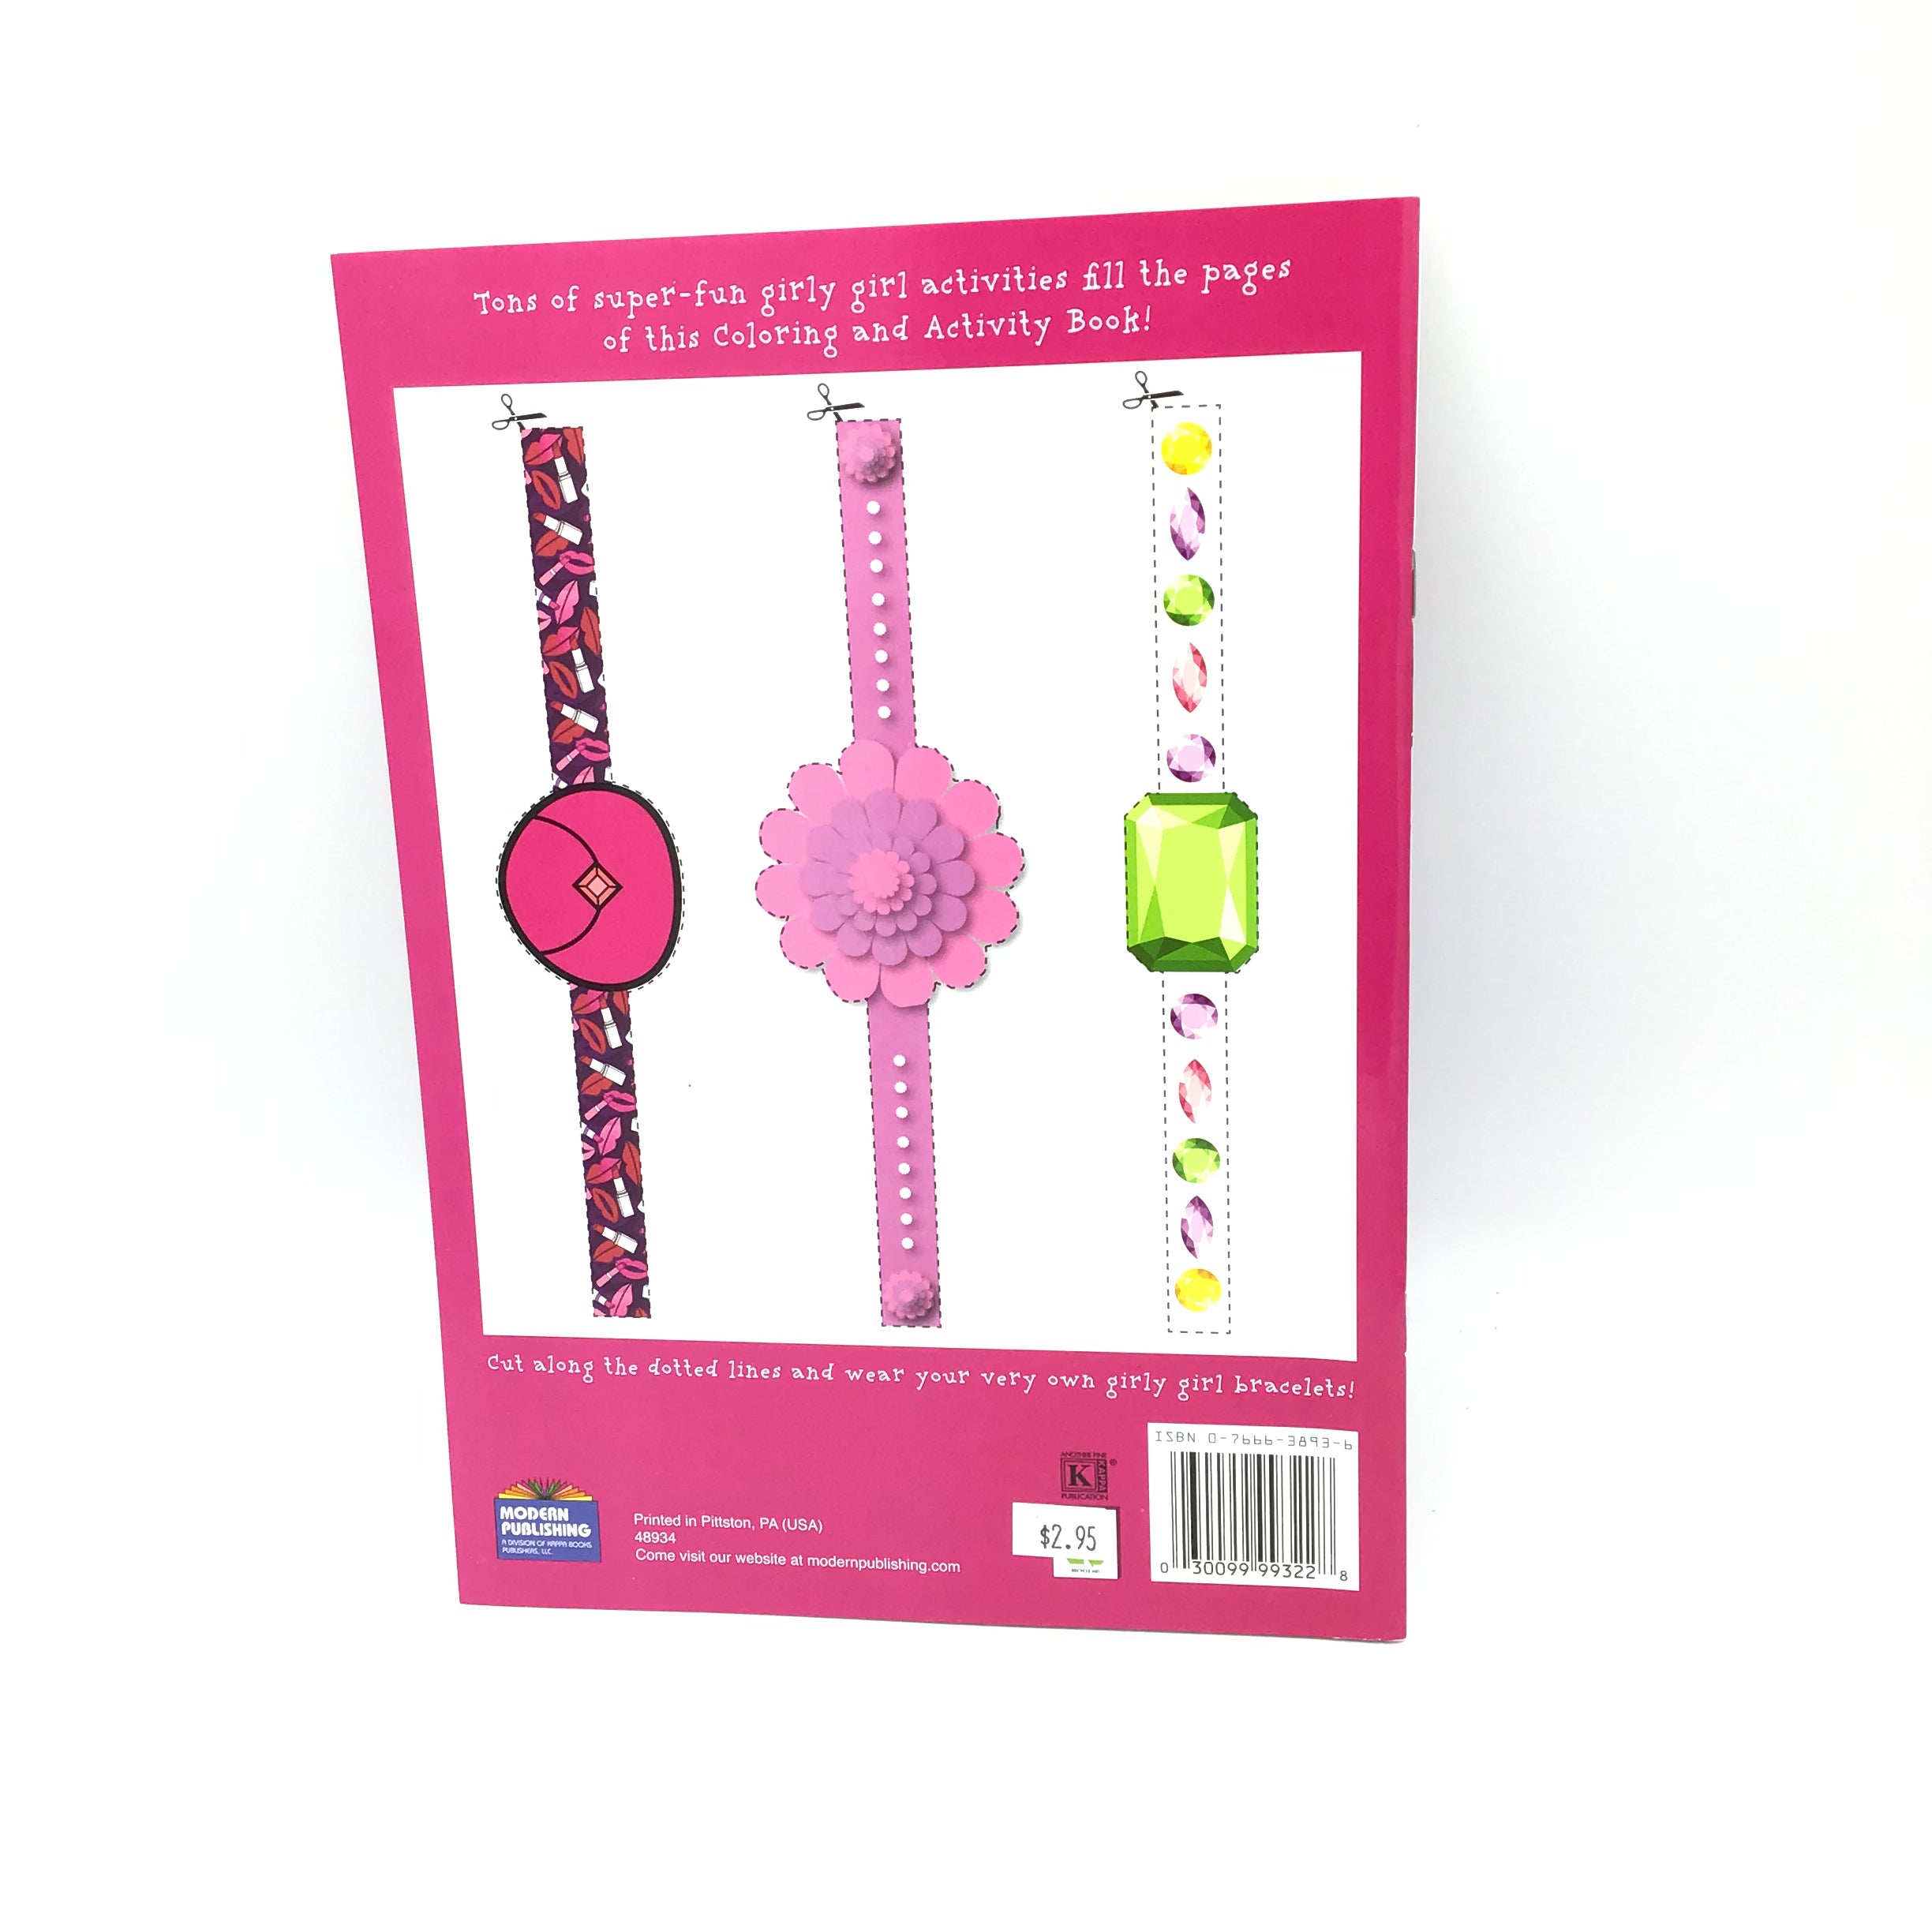 Girly Girl Coloring & Activity book